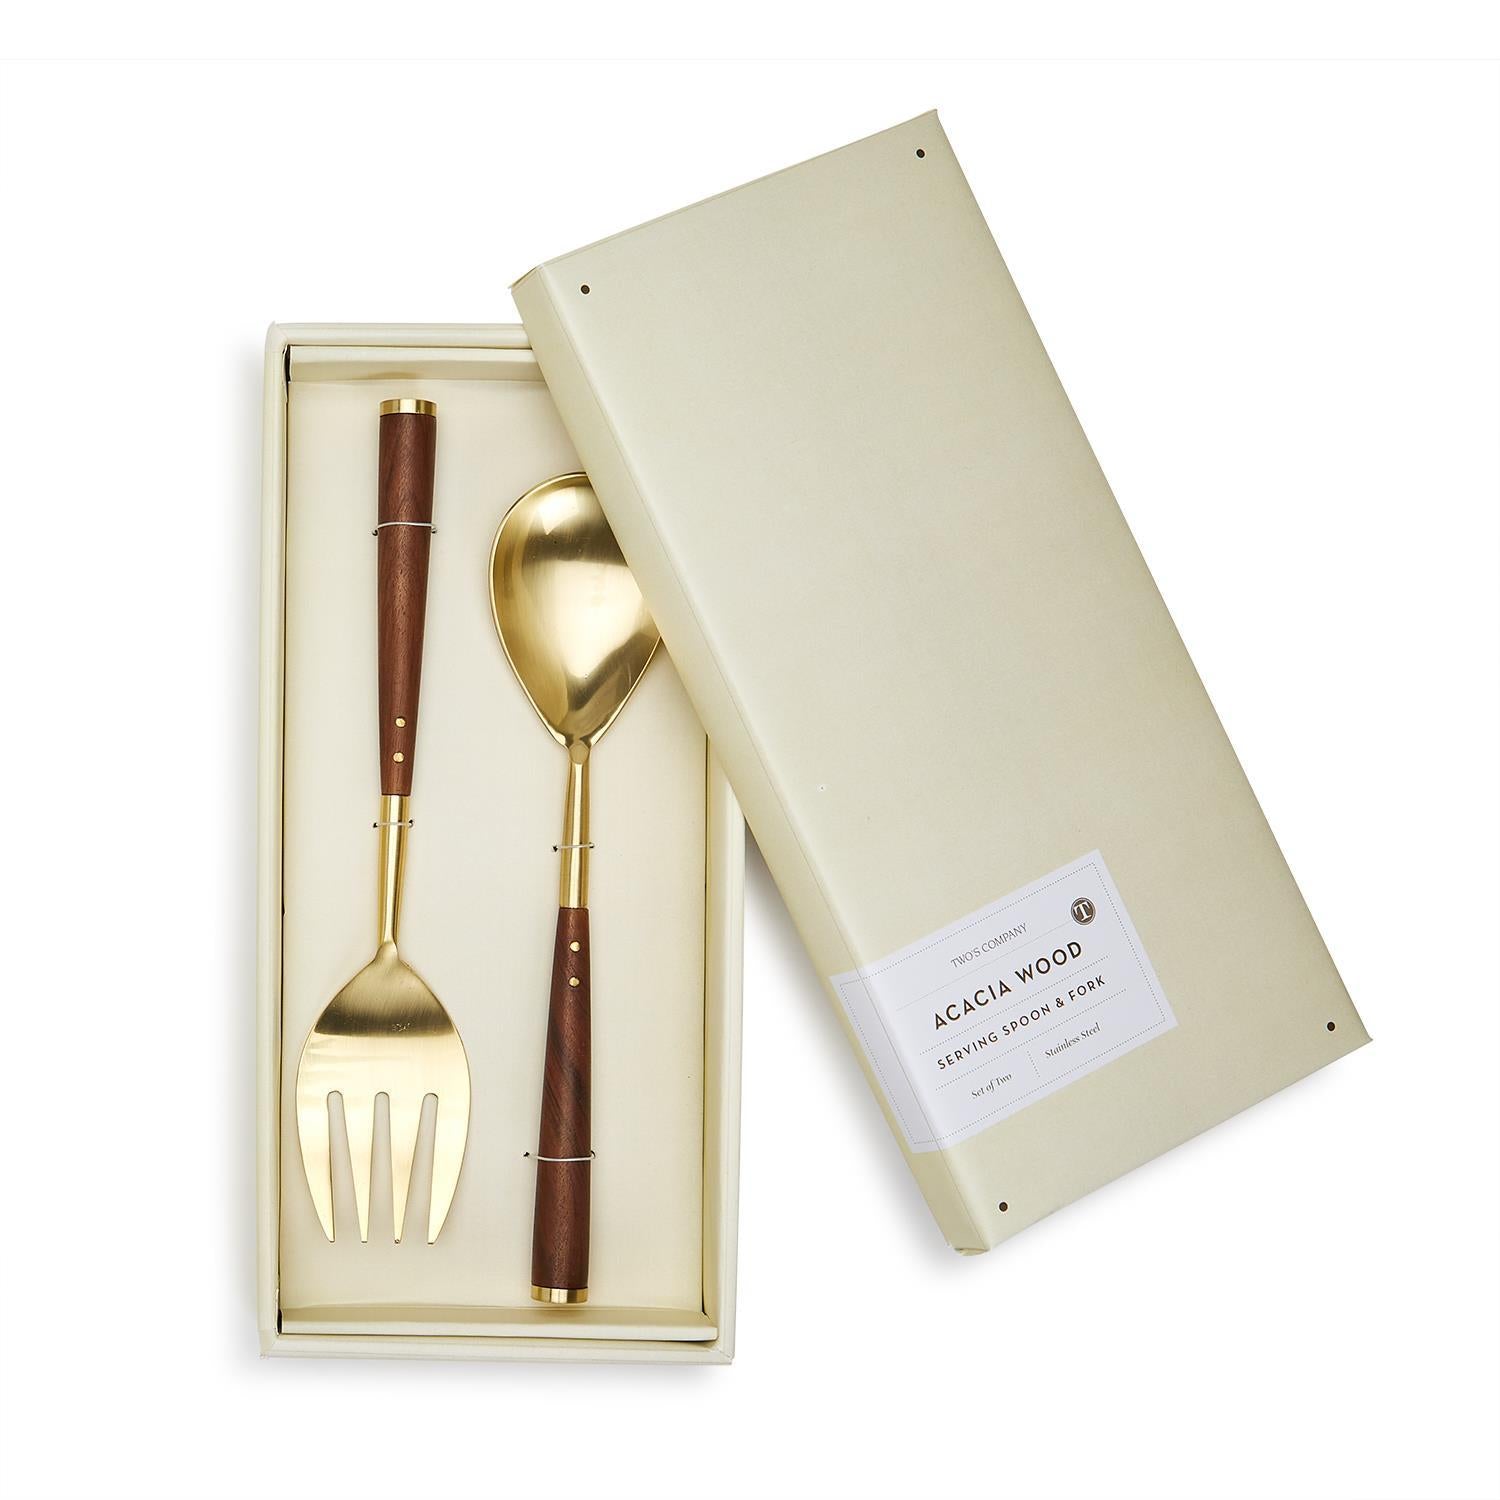 Acacia Wood Servers Set of 2 in Gift Box Kitchen + Entertaining Two's Company   